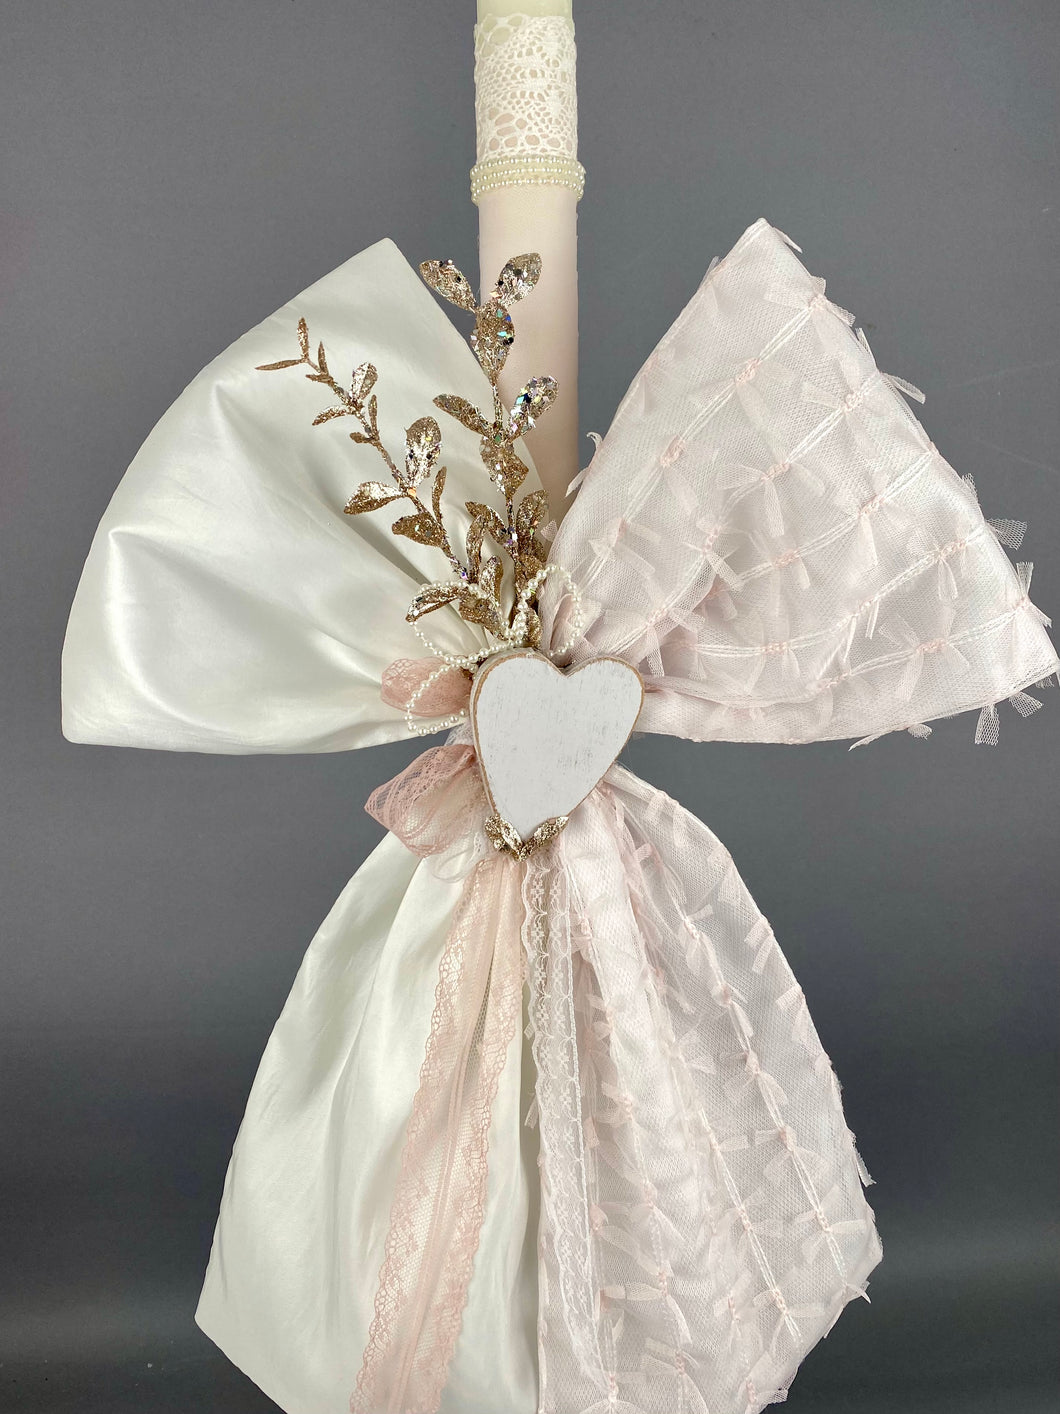 Wrapped Baptismal Candle with White and Dusty Rose Fabrics, Glitter Rose Gold Leaves with Pearls and Wooden Heart GC202214